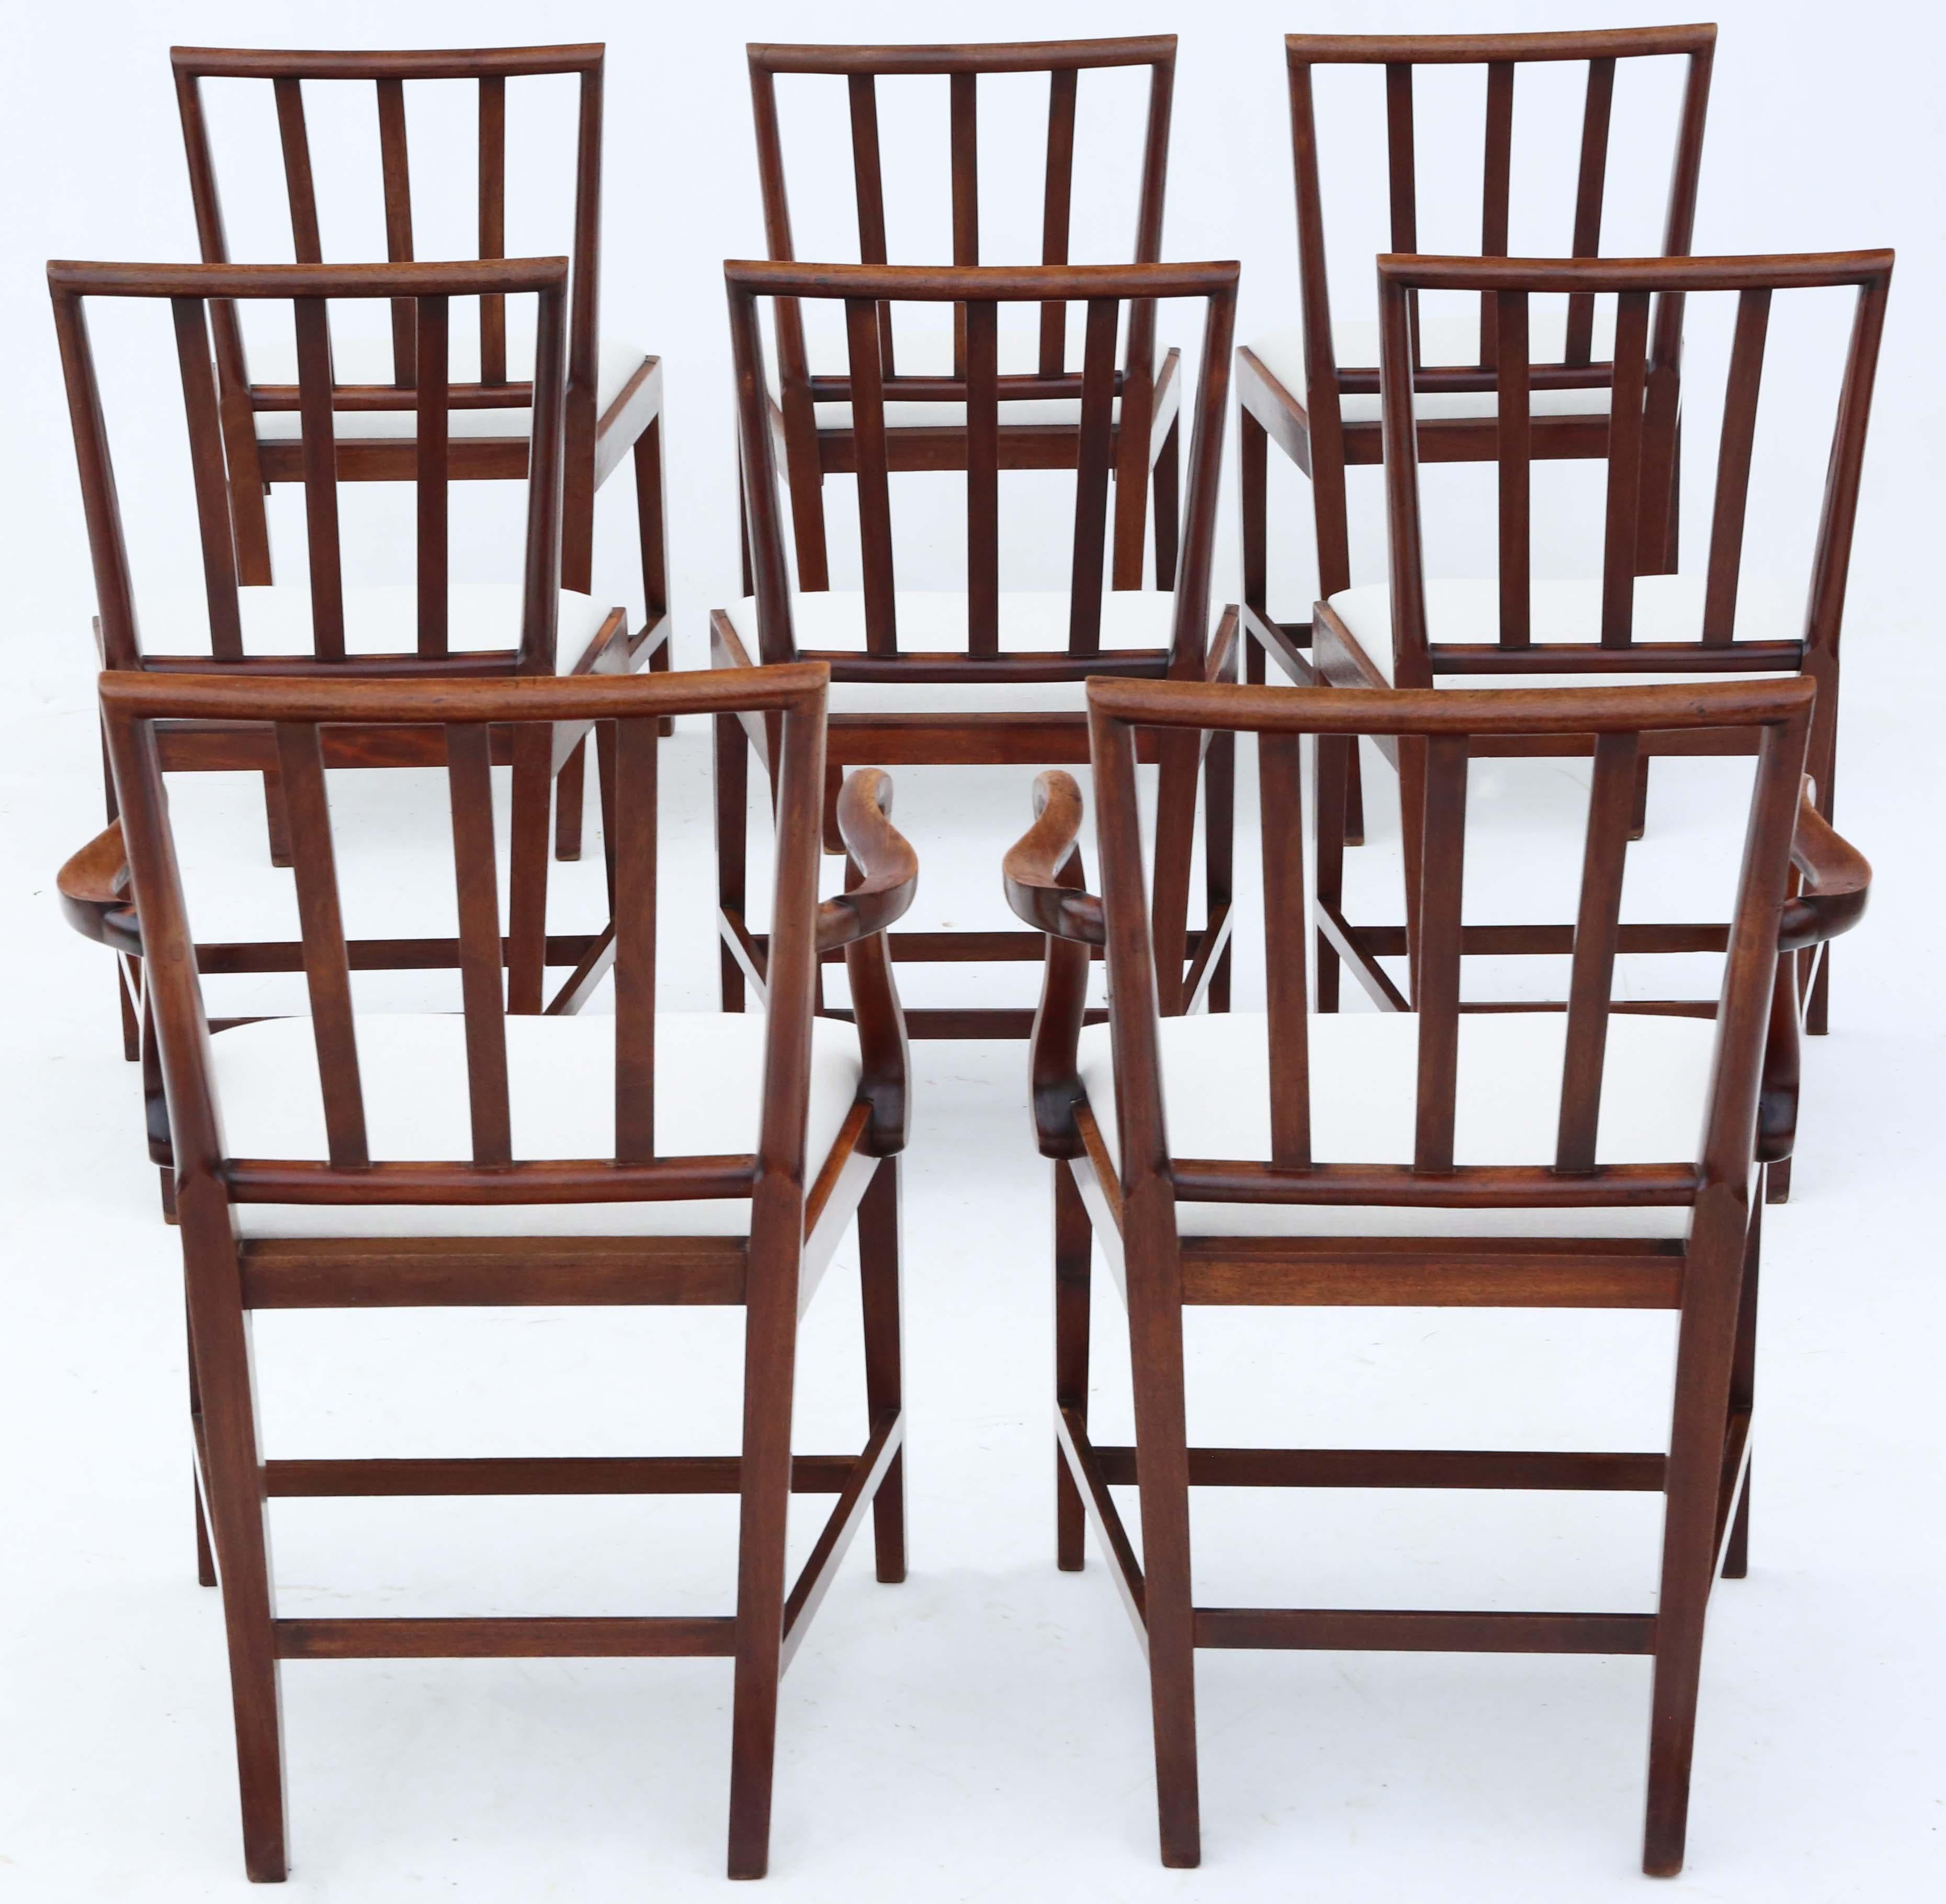 Regency Mahogany Dining Chairs: Set of 8 (6+2), Antique Quality, Early 19th C In Good Condition For Sale In Wisbech, Cambridgeshire